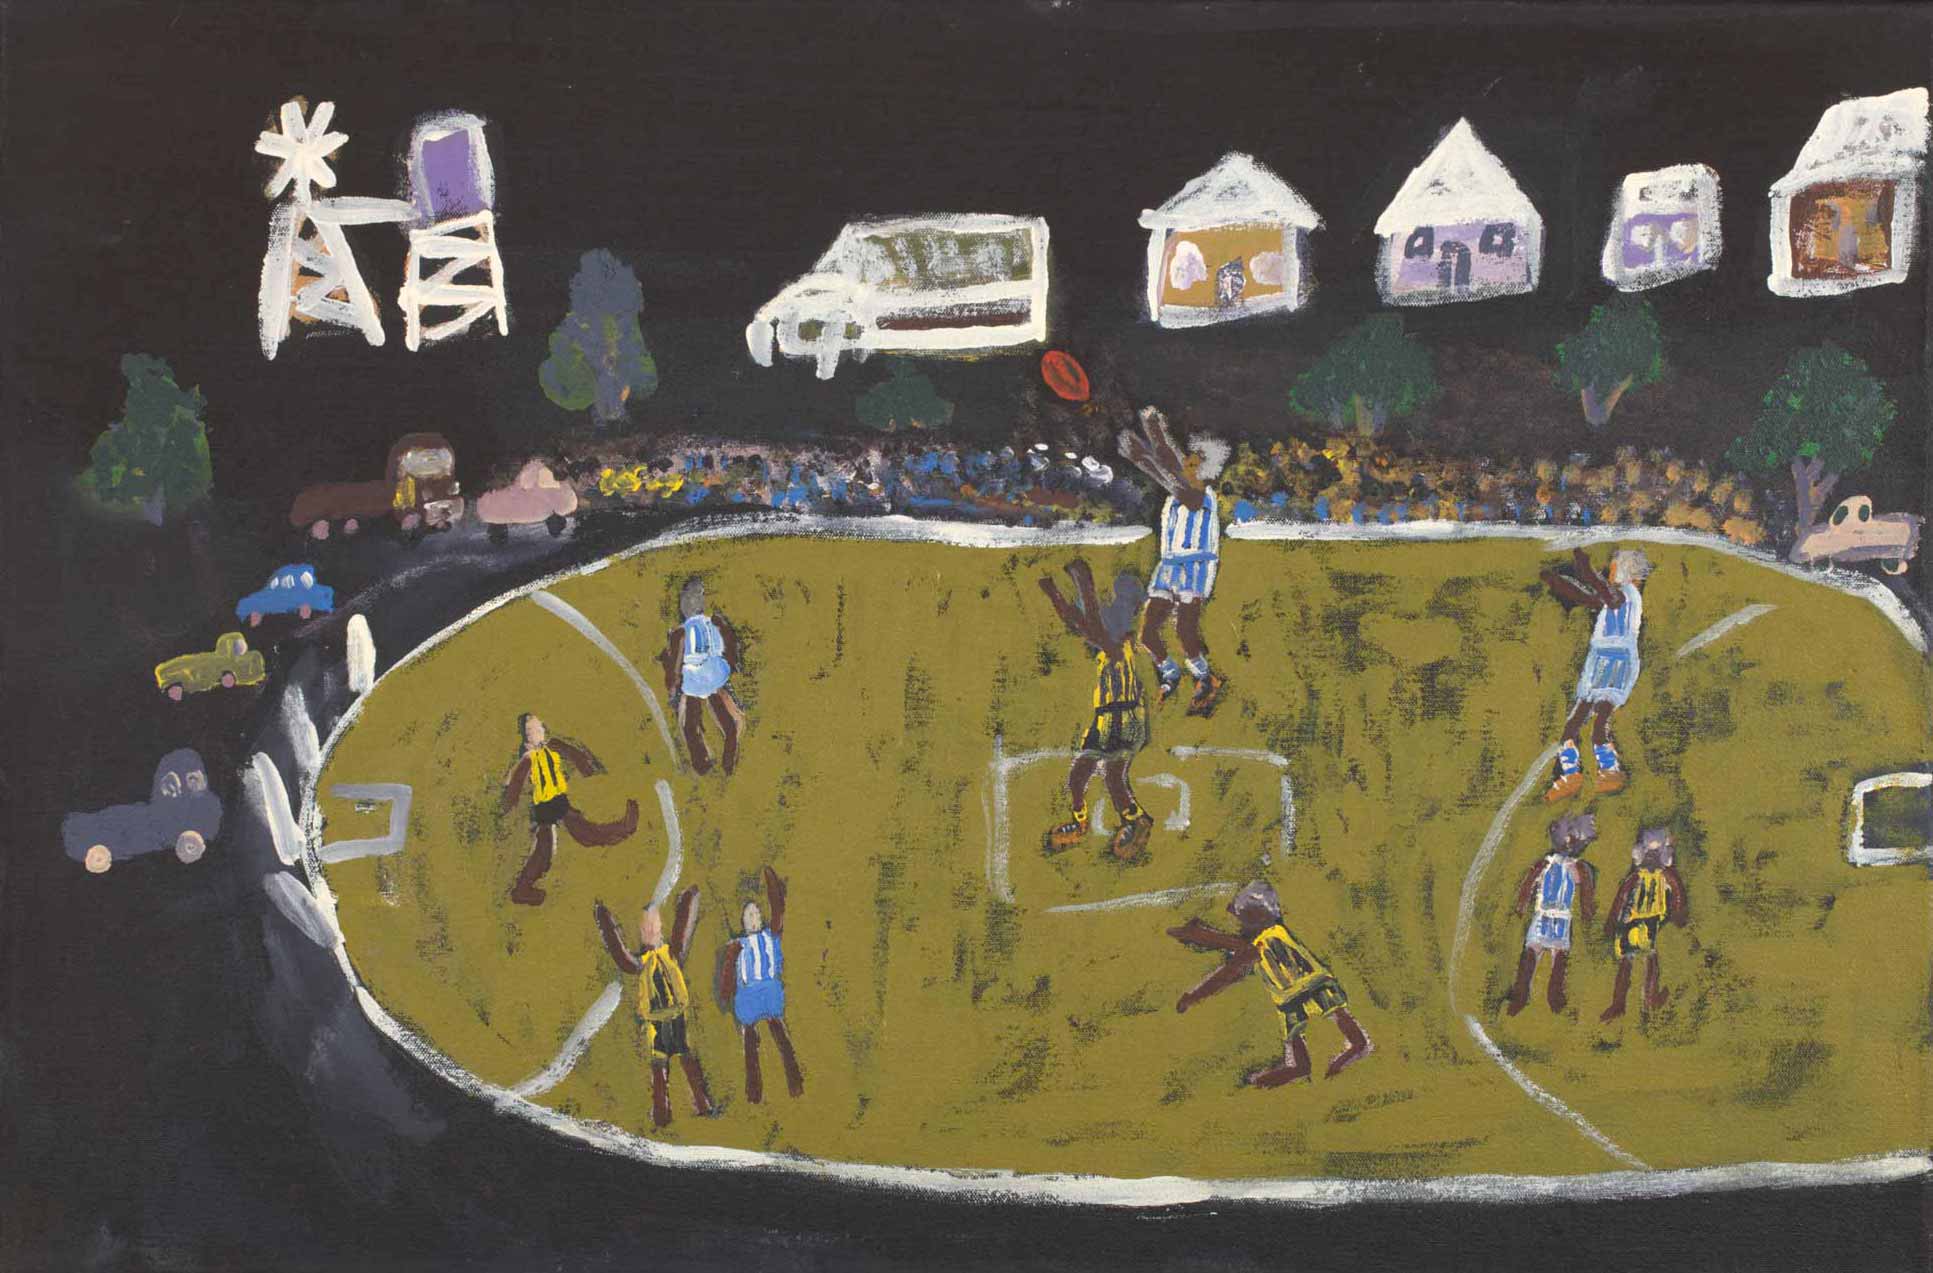 An acrylic painting on canvas showing a football match on a green oval against a dark background.